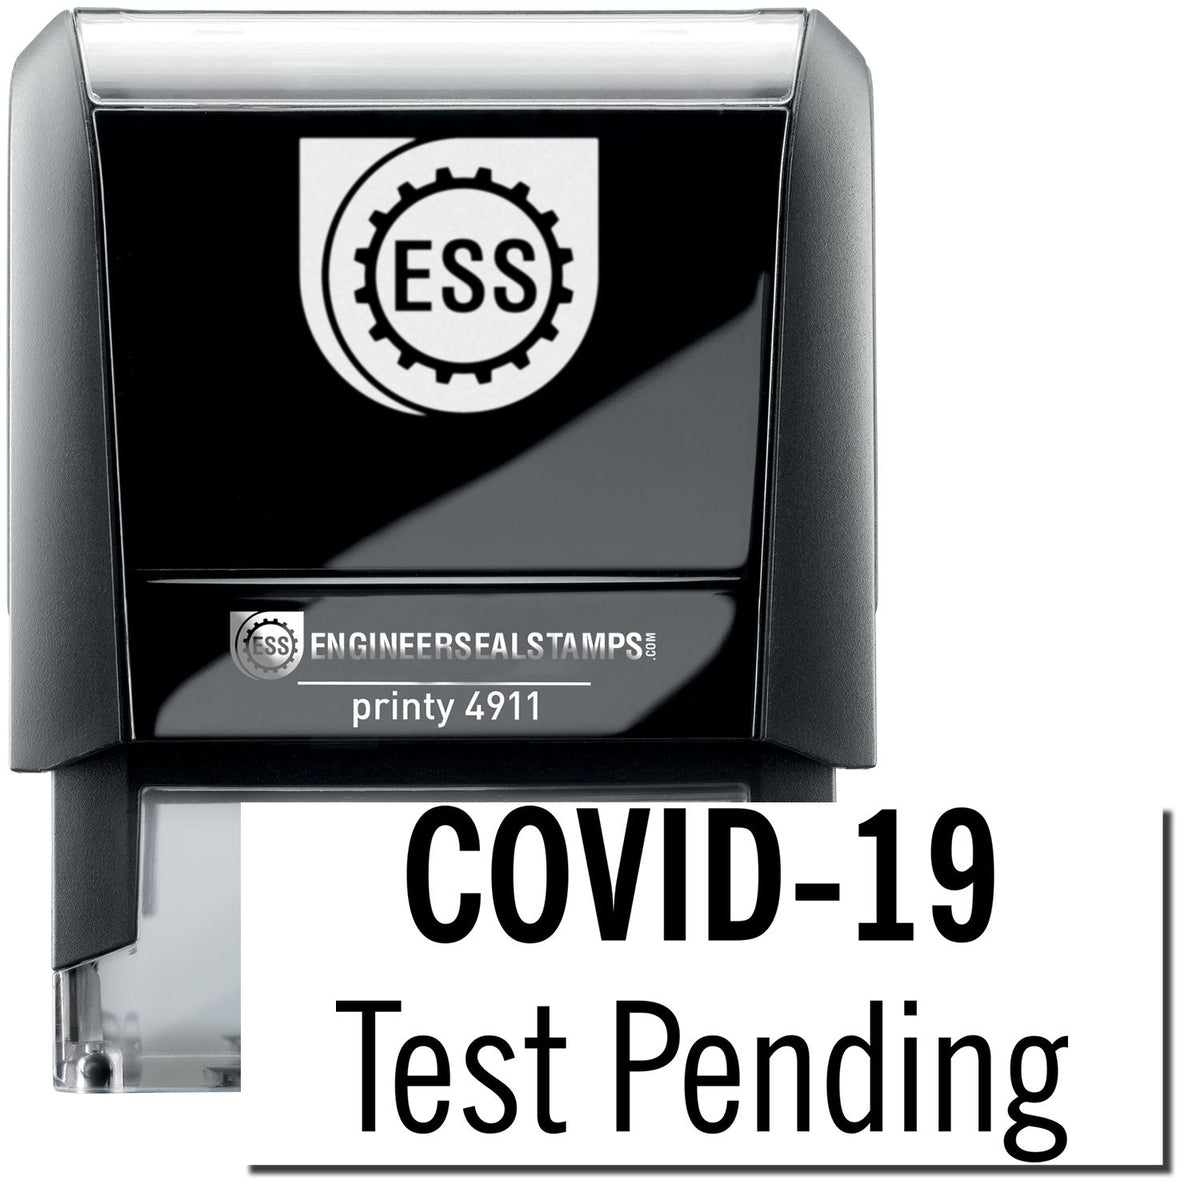 A self-inking stamp with a stamped image showing how the text &quot;COVID-19 Test Pending&quot; is displayed after stamping.